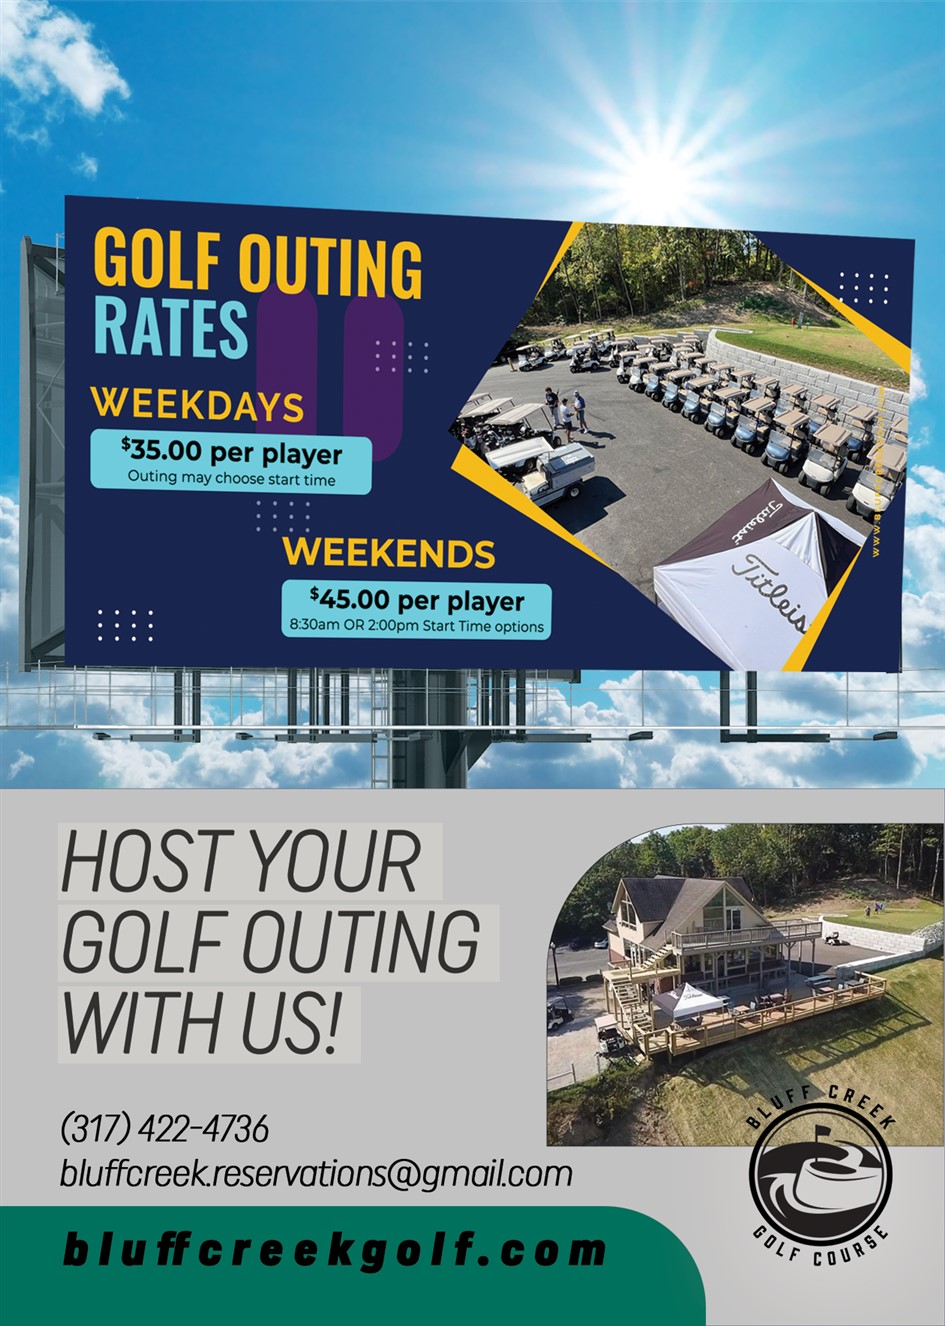 Course Guide GOLF OUTING 945 x 1326